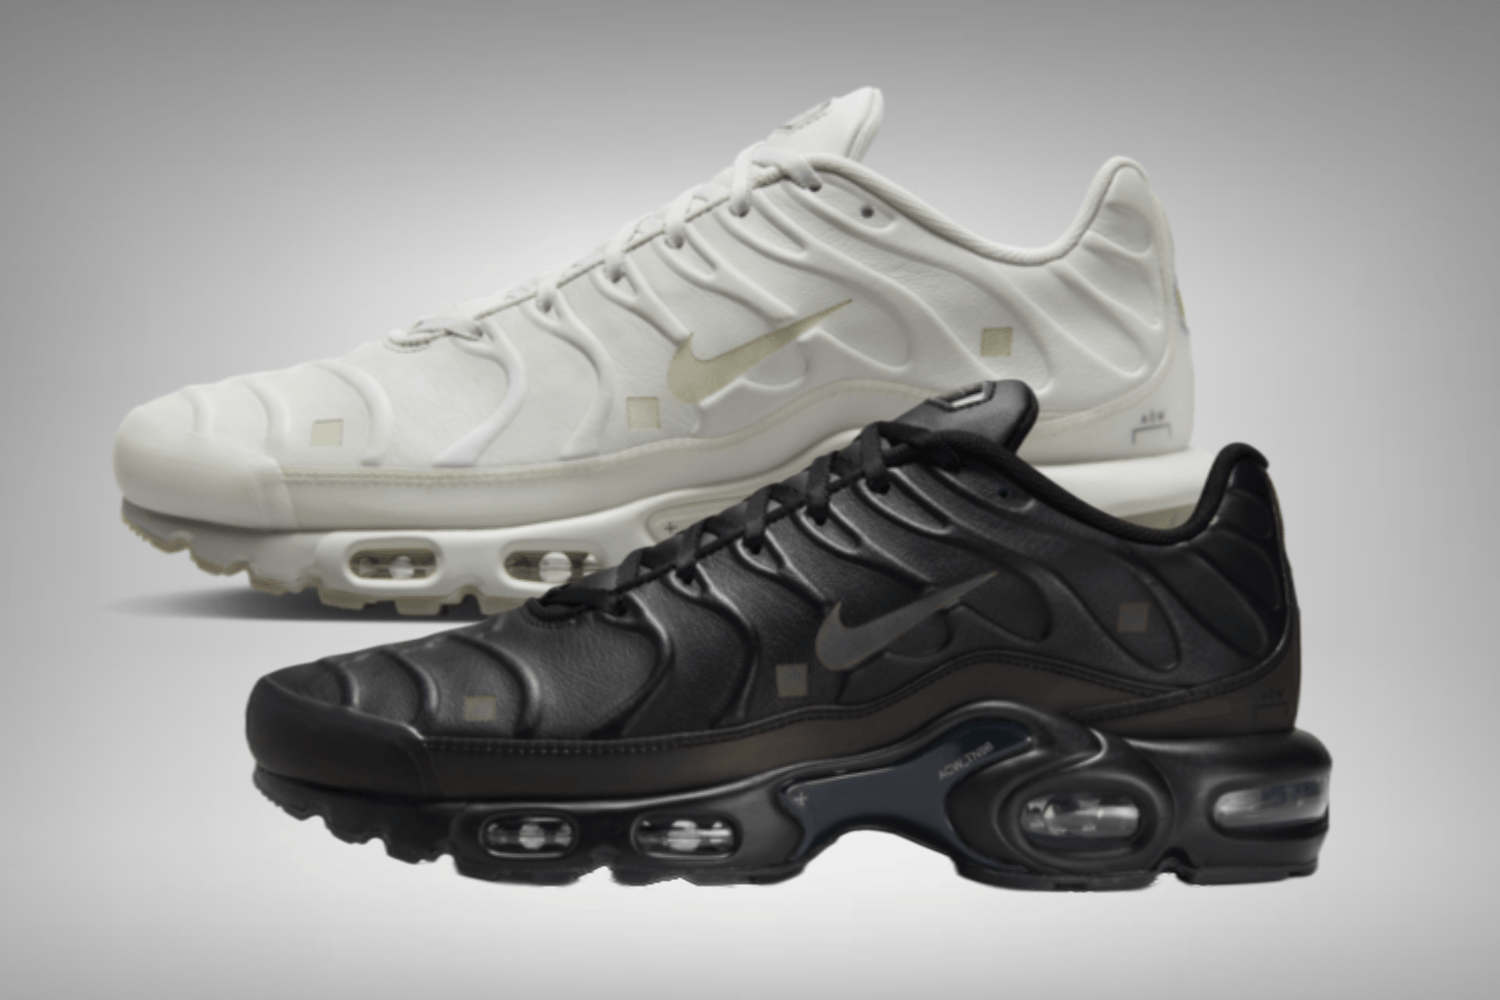 Nieuwe A-COLD-WALL x Nike Air Max Plus onthuld